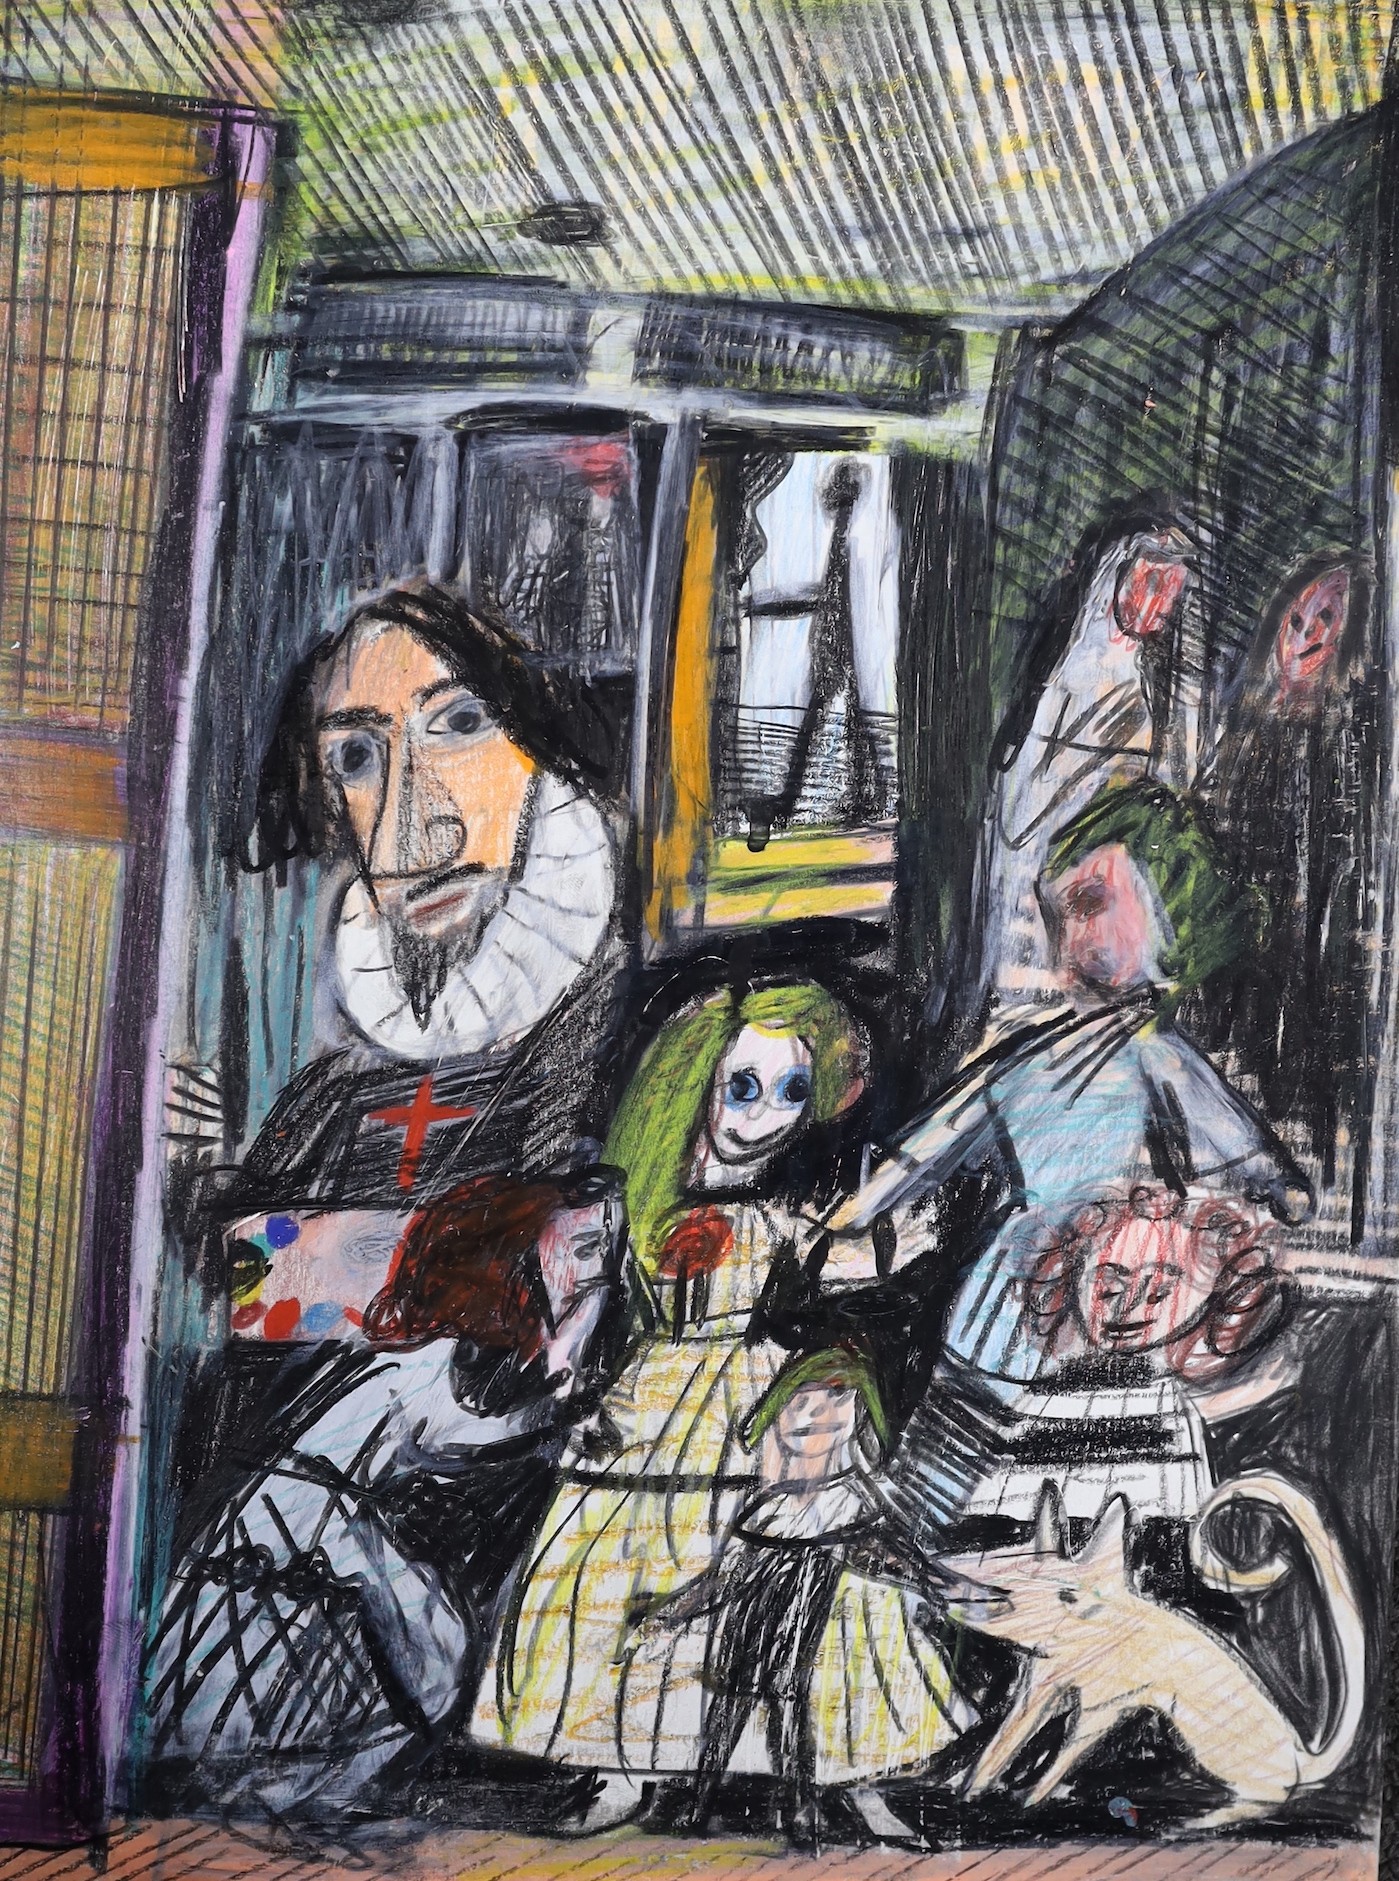 Matthew Collings (1955-) after Velasquez, mixed media on paper, 'Las Meninas', inscribed verso and dated 2021, 31 x 23cm, unframed